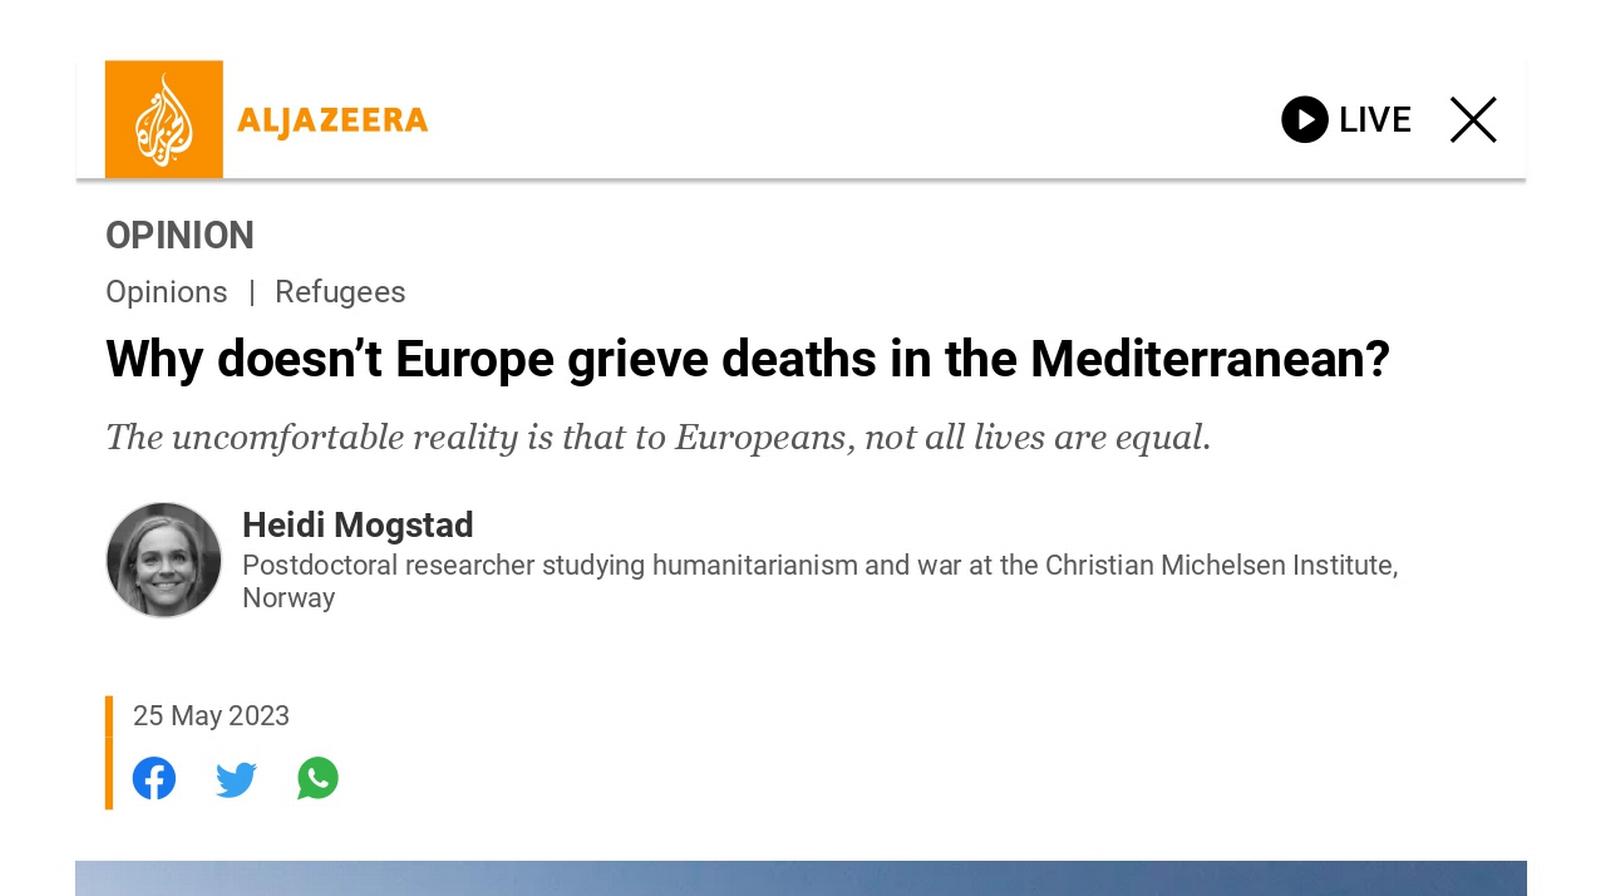 Why doesn't Europe grieve deaths in the Mediterranean?